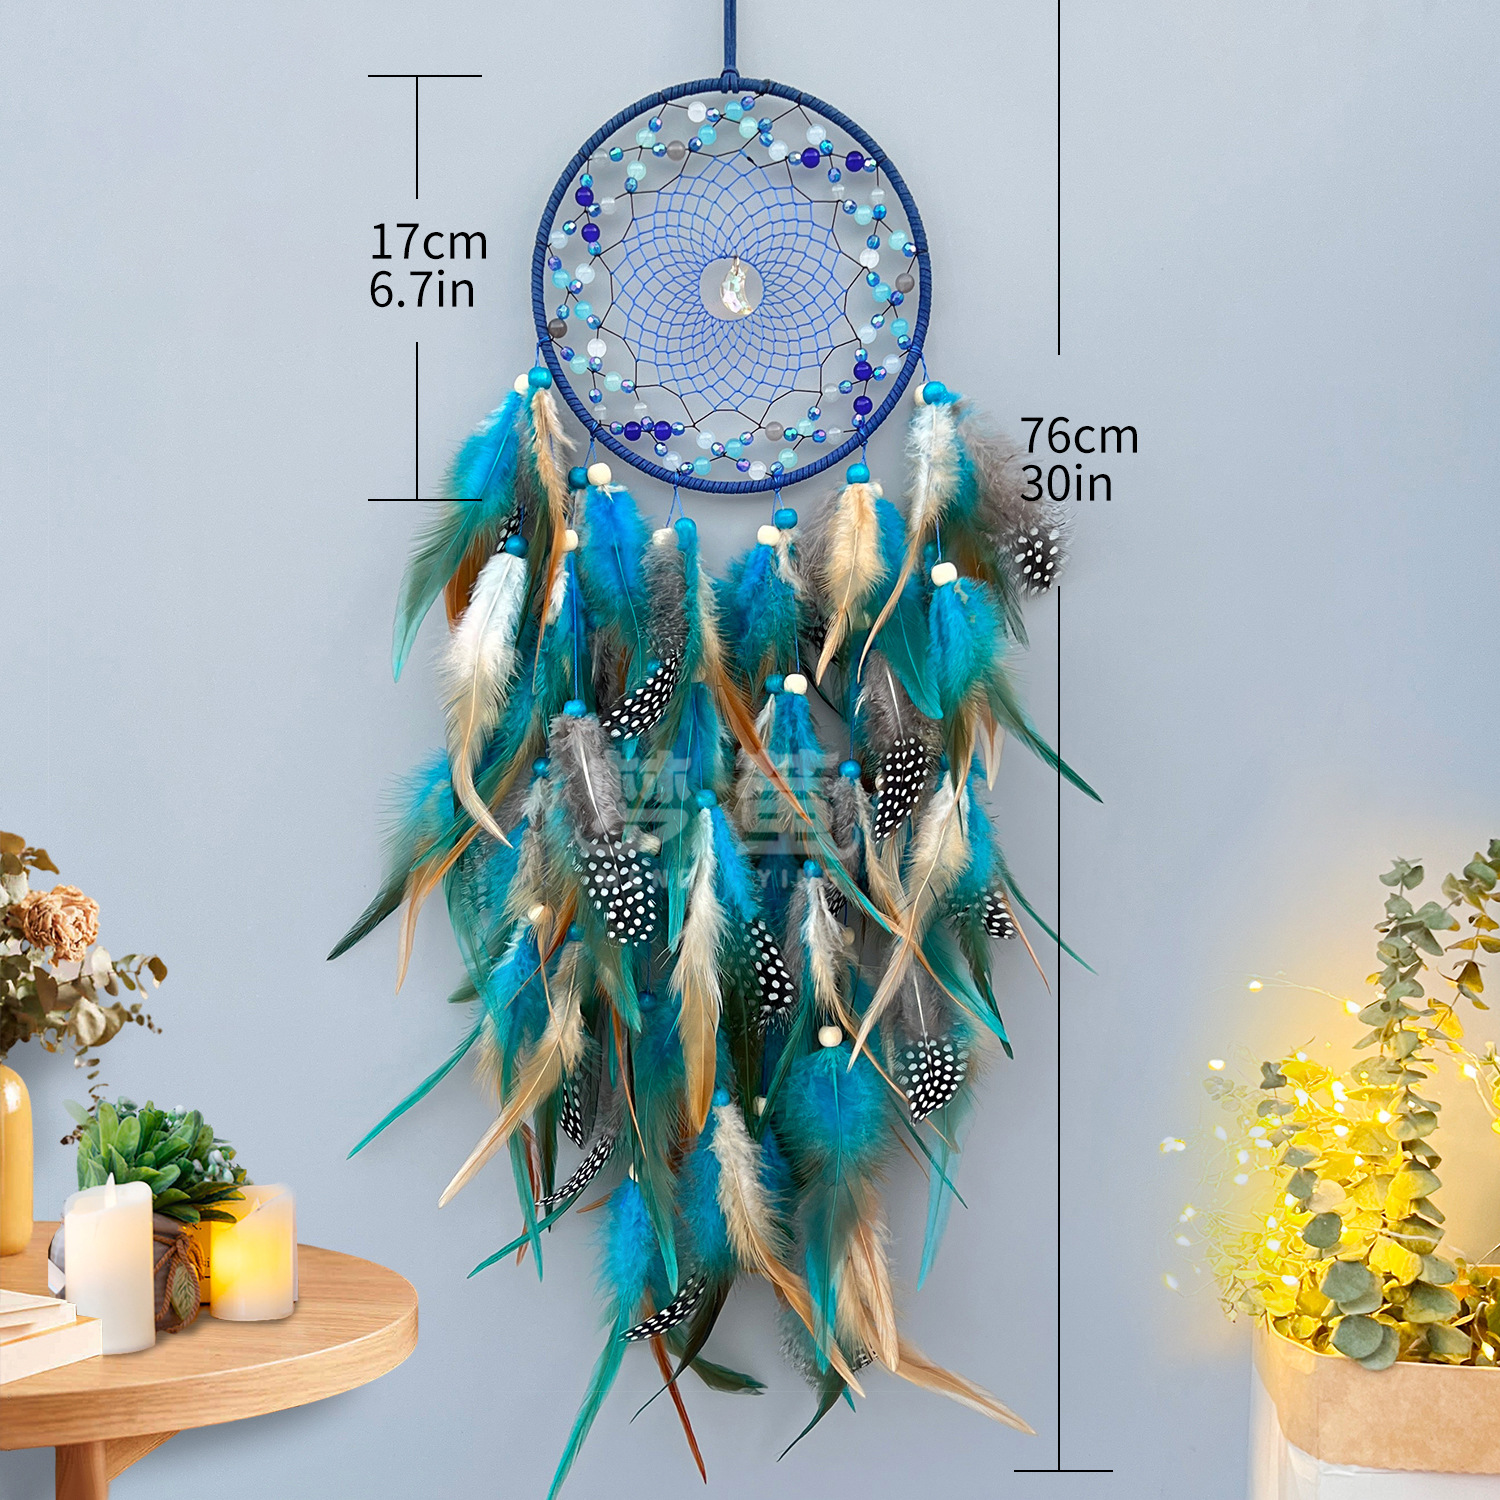 [Mengyi Original] Agate Dreamcatcher Ornaments Colorful Feather Woven Decorations Wall Pendant Exclusive for Cross-Border